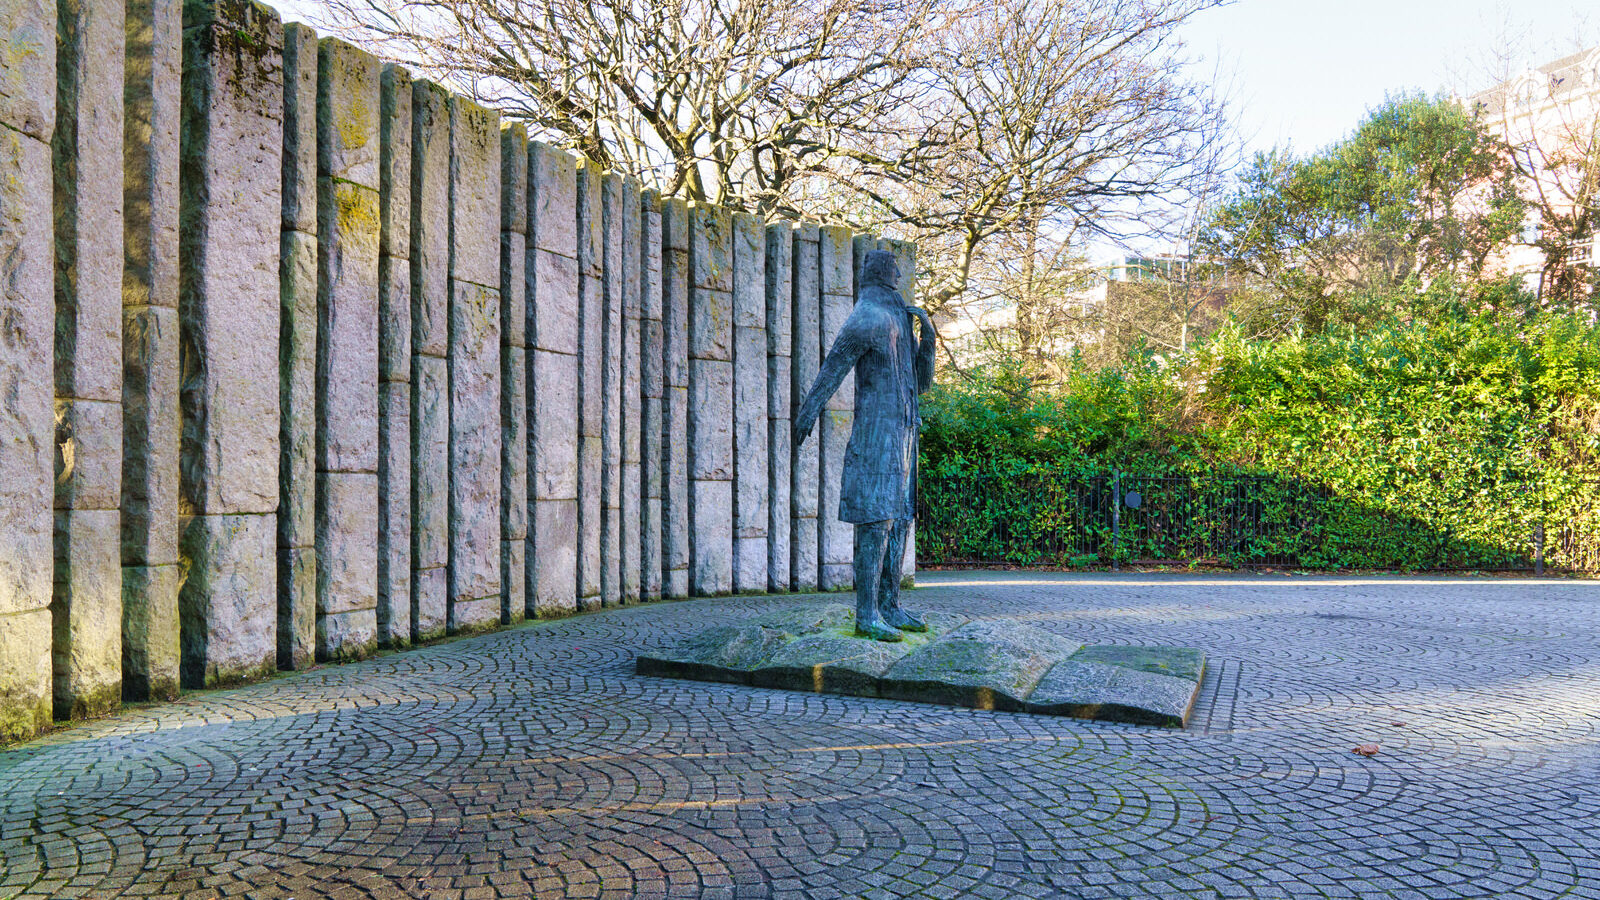 WOLFE TONE BY EDWARD DELANEY [I LIKE THE SETTING AT THE CORNER OF STEPHEN'S GREEN]-228100-1